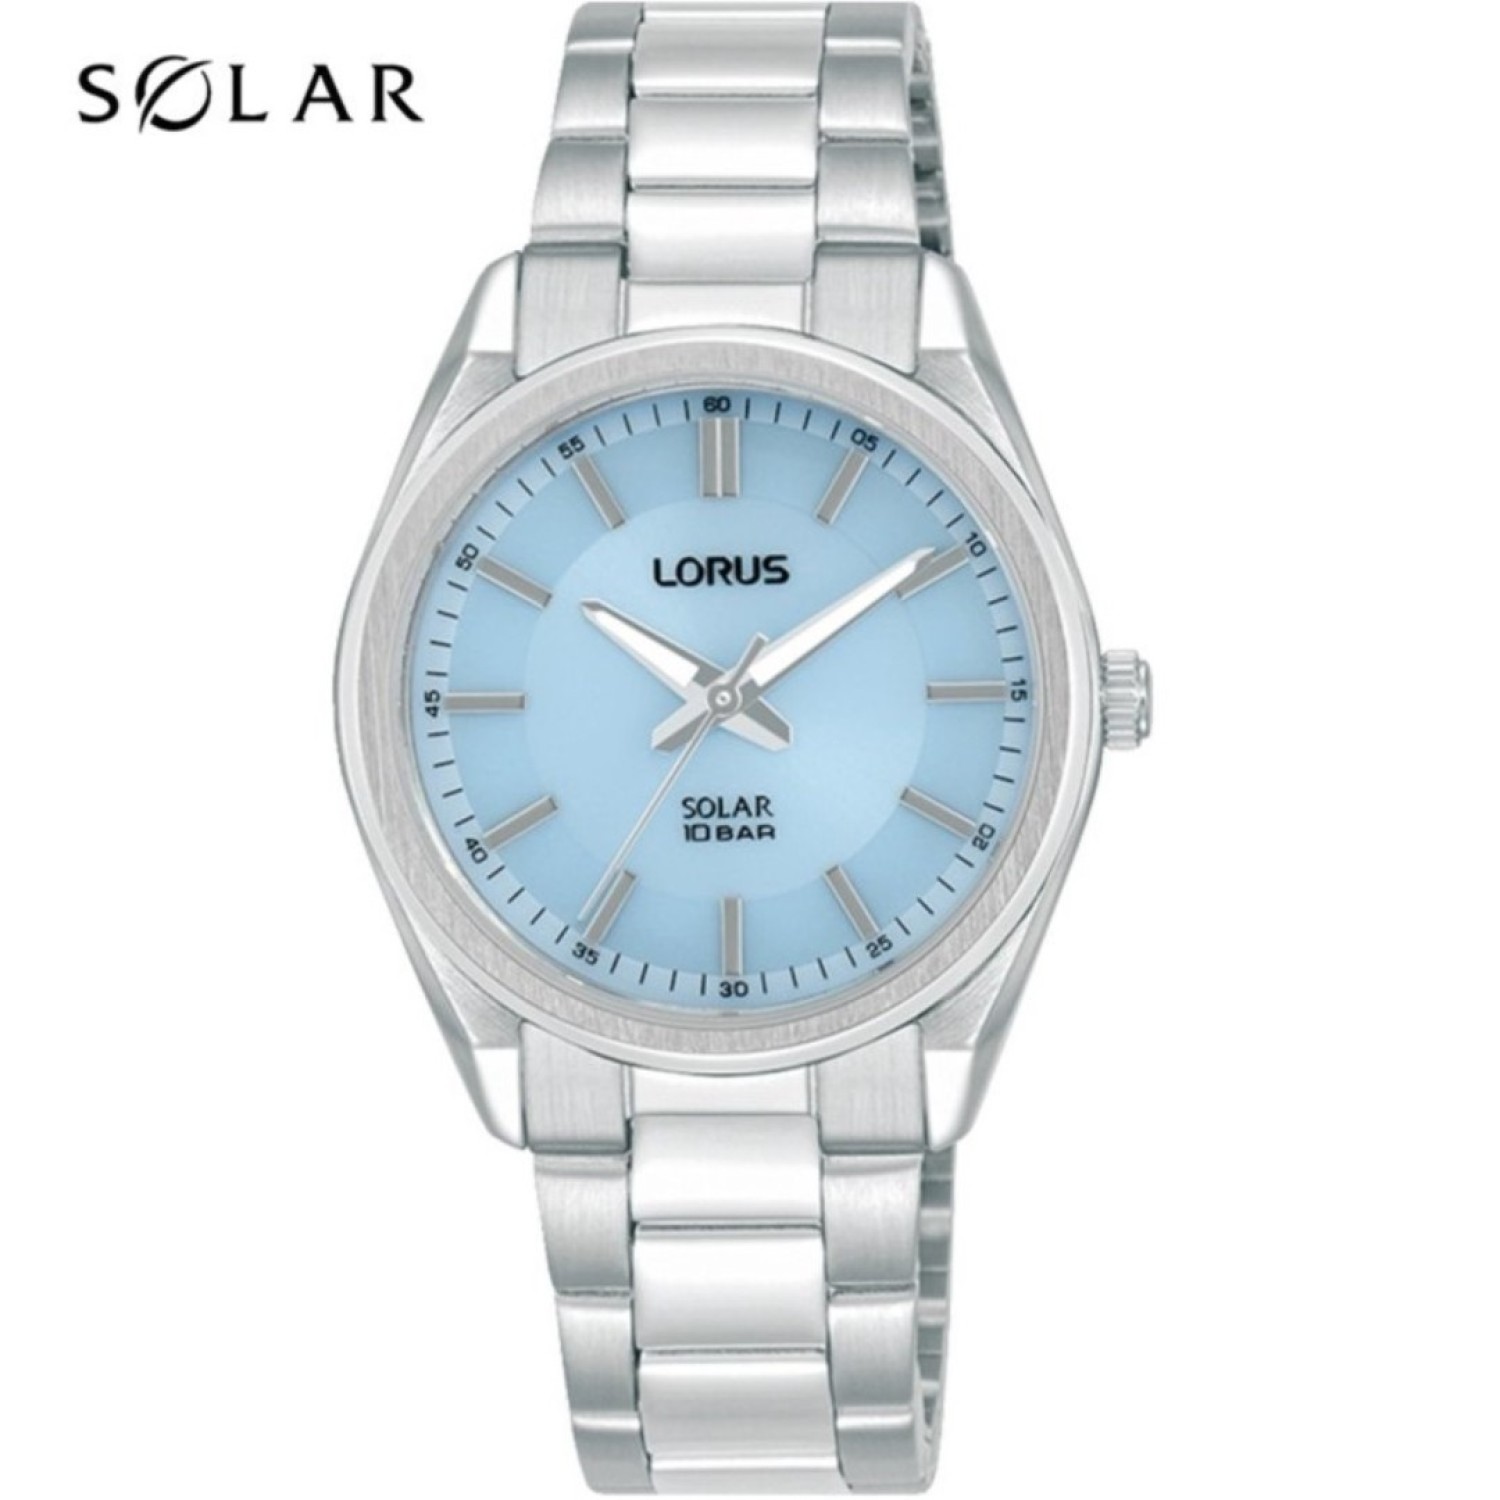 RY511AX9 Lorus Ladies Analogue Solar Watch RY511AX-9 Watches Auckland